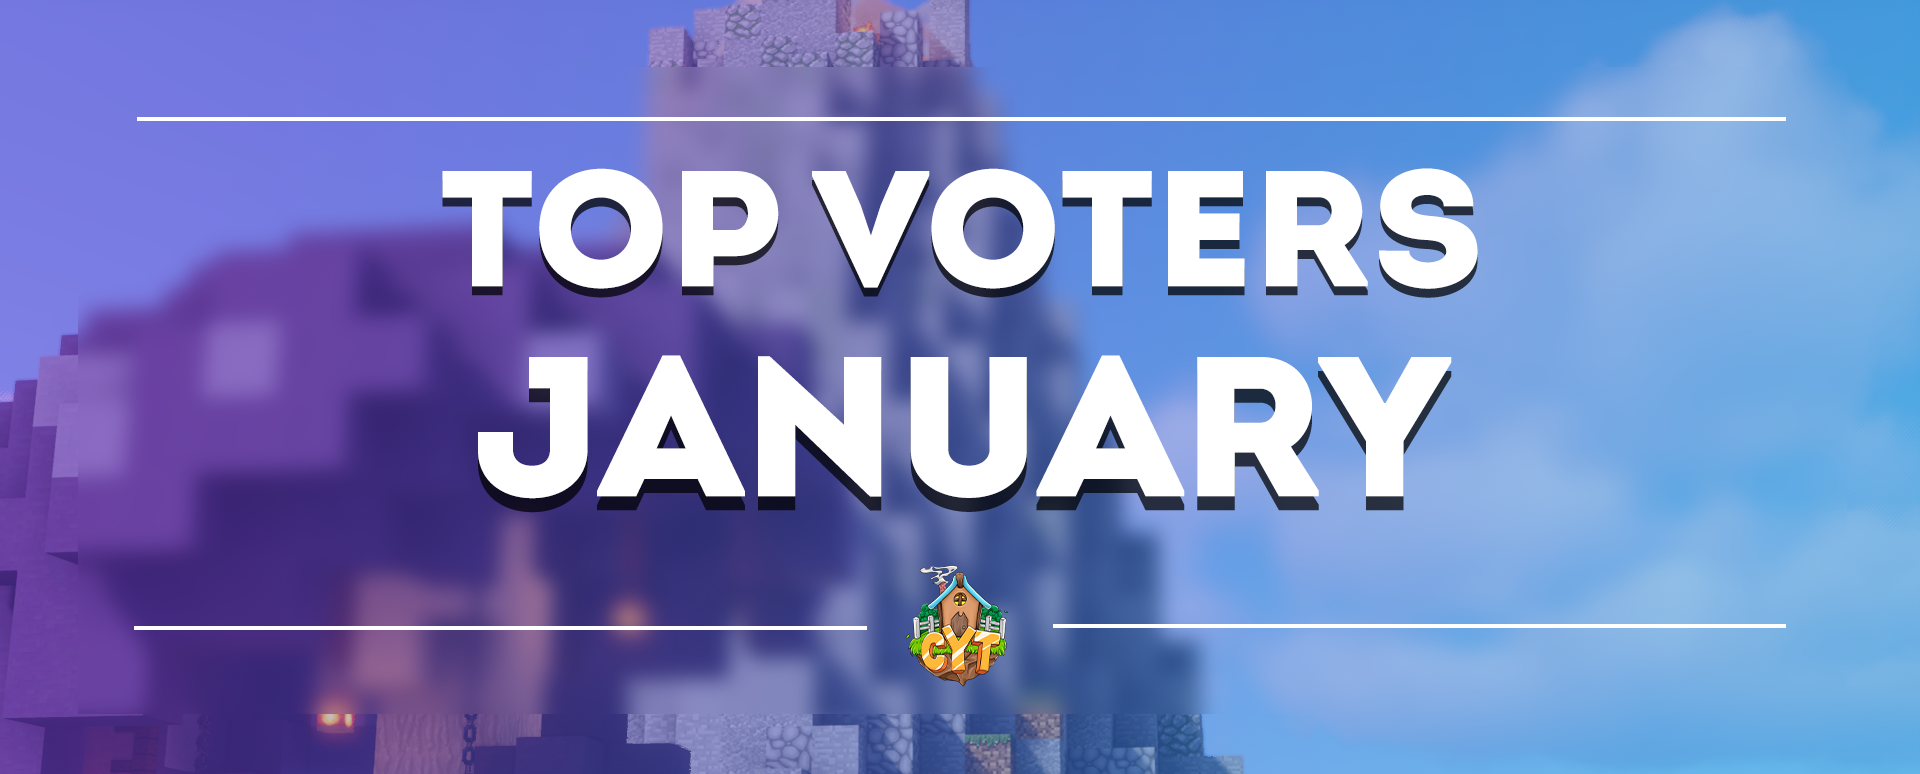 Top Voters - January